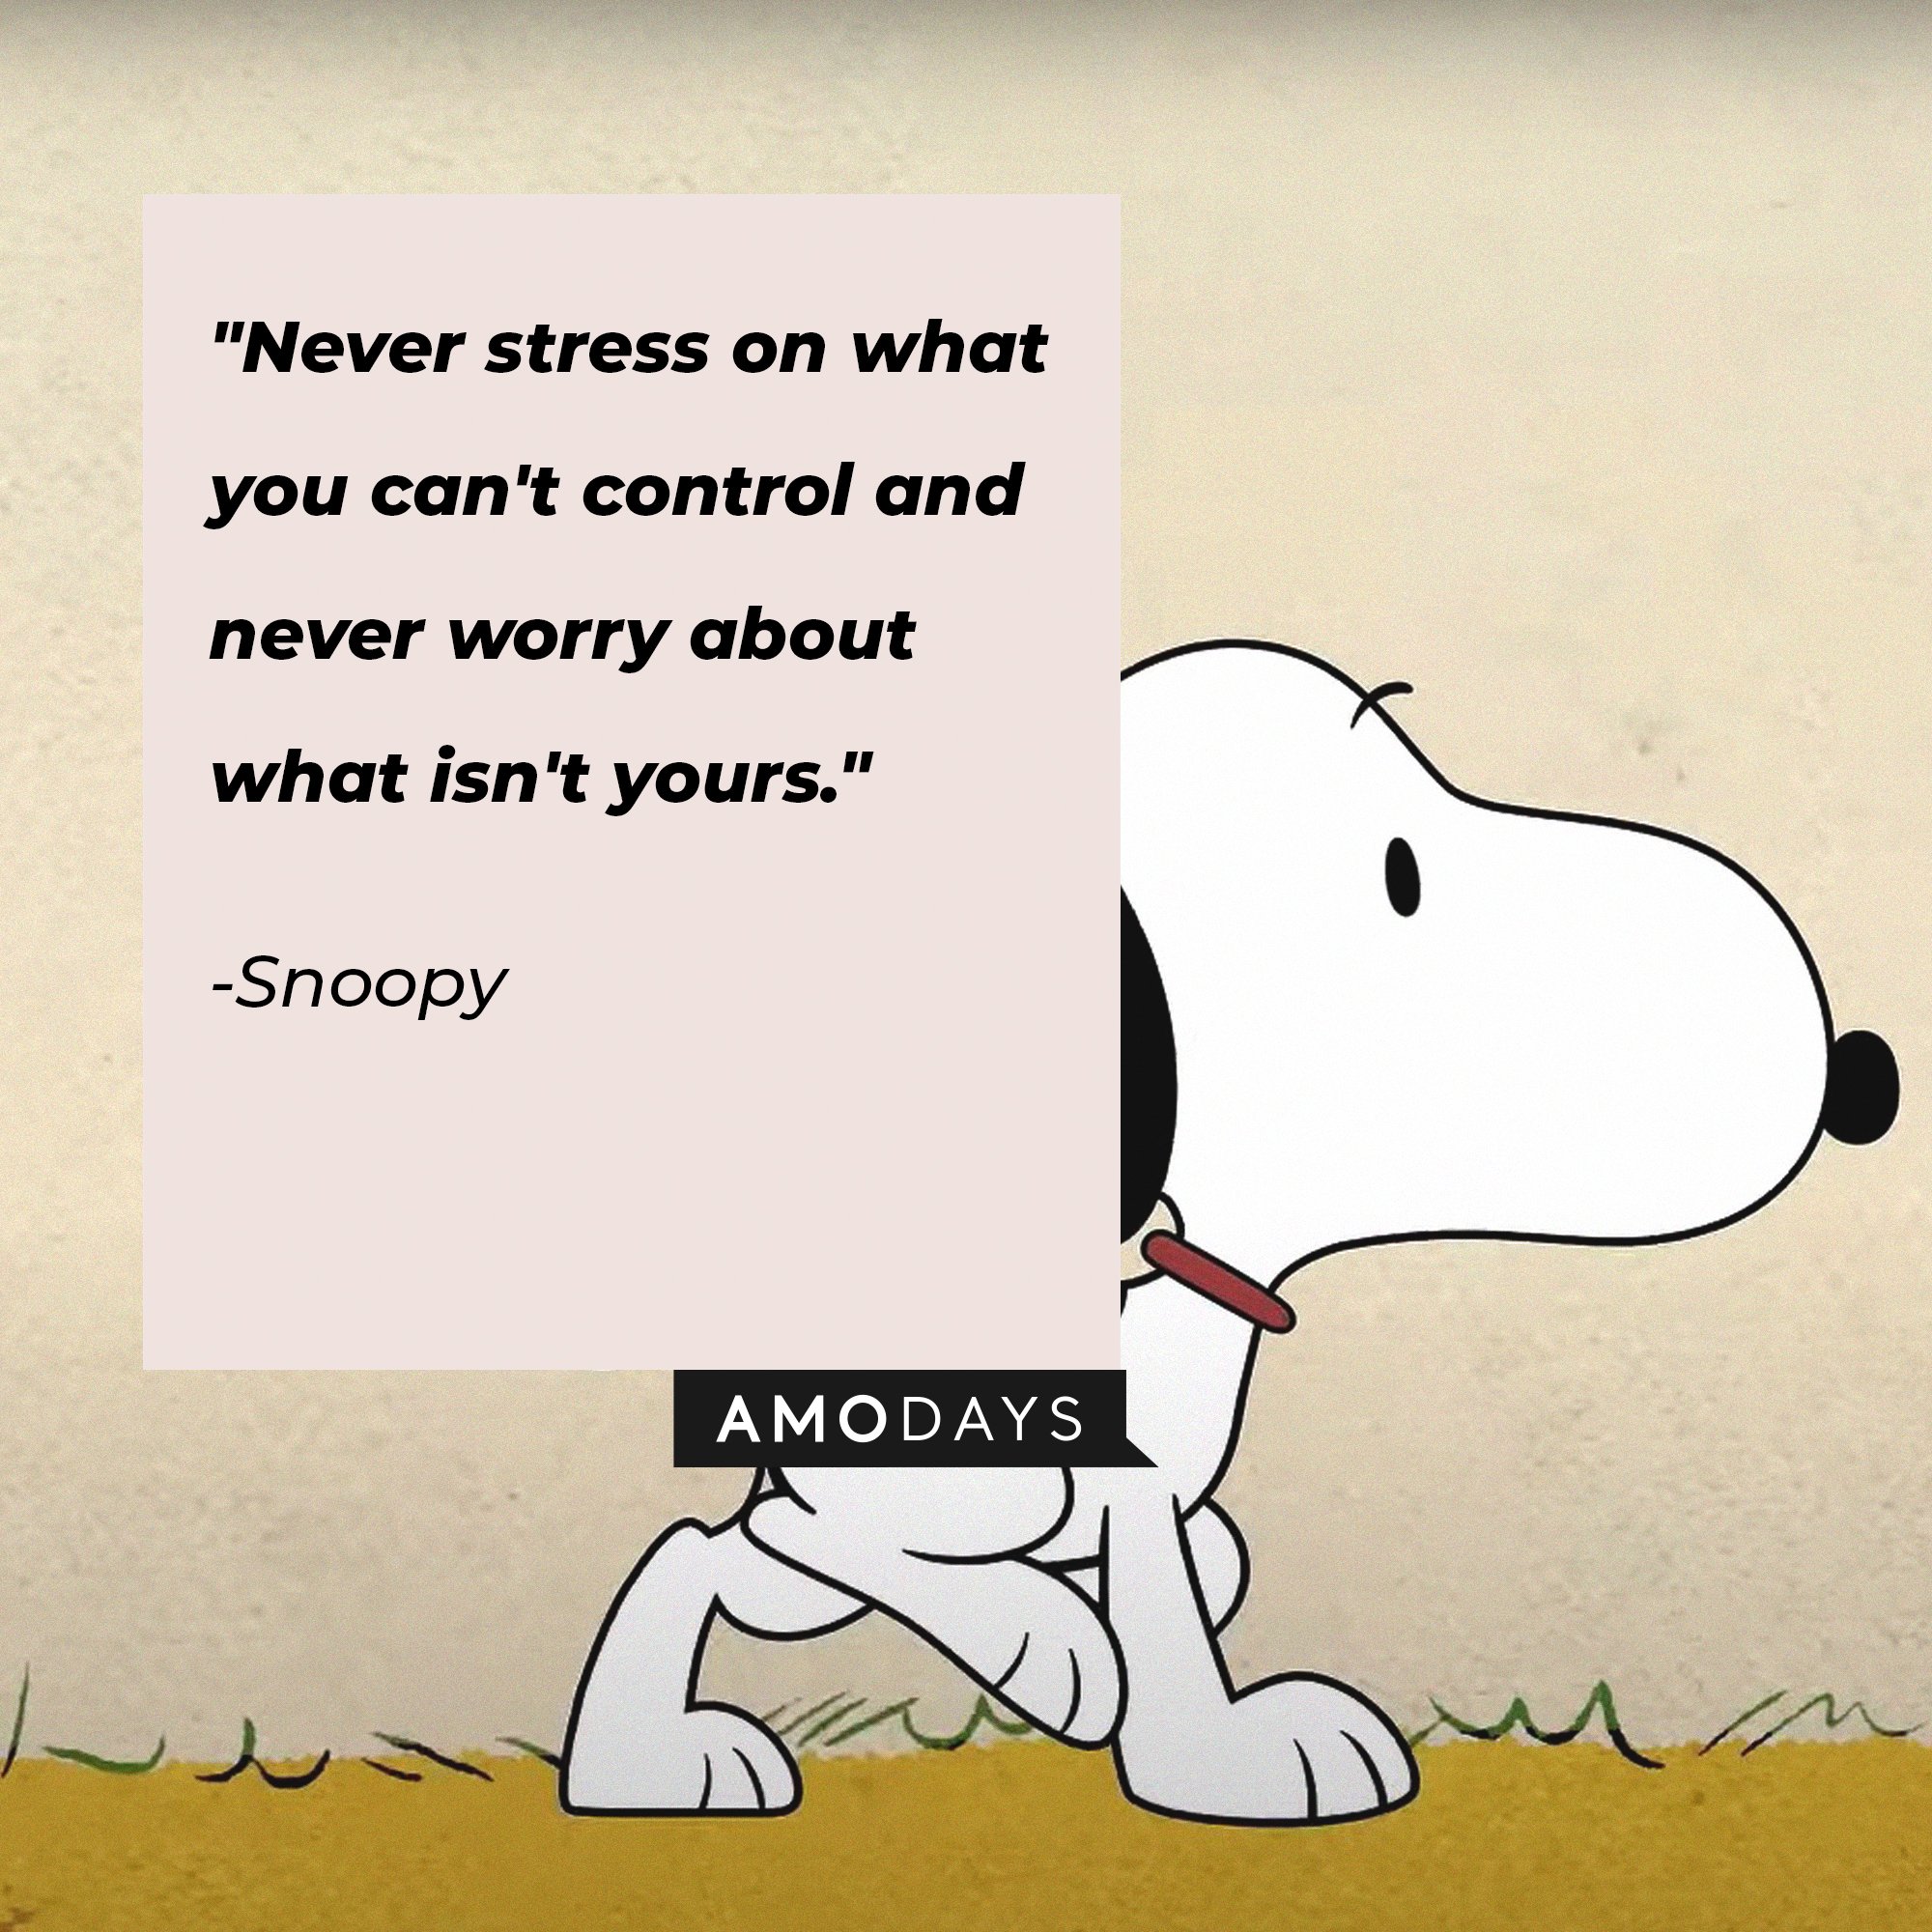 Snoopy’s quote: "Never stress on what you can't control and never worry about what isn't yours." | Image: AmoDays